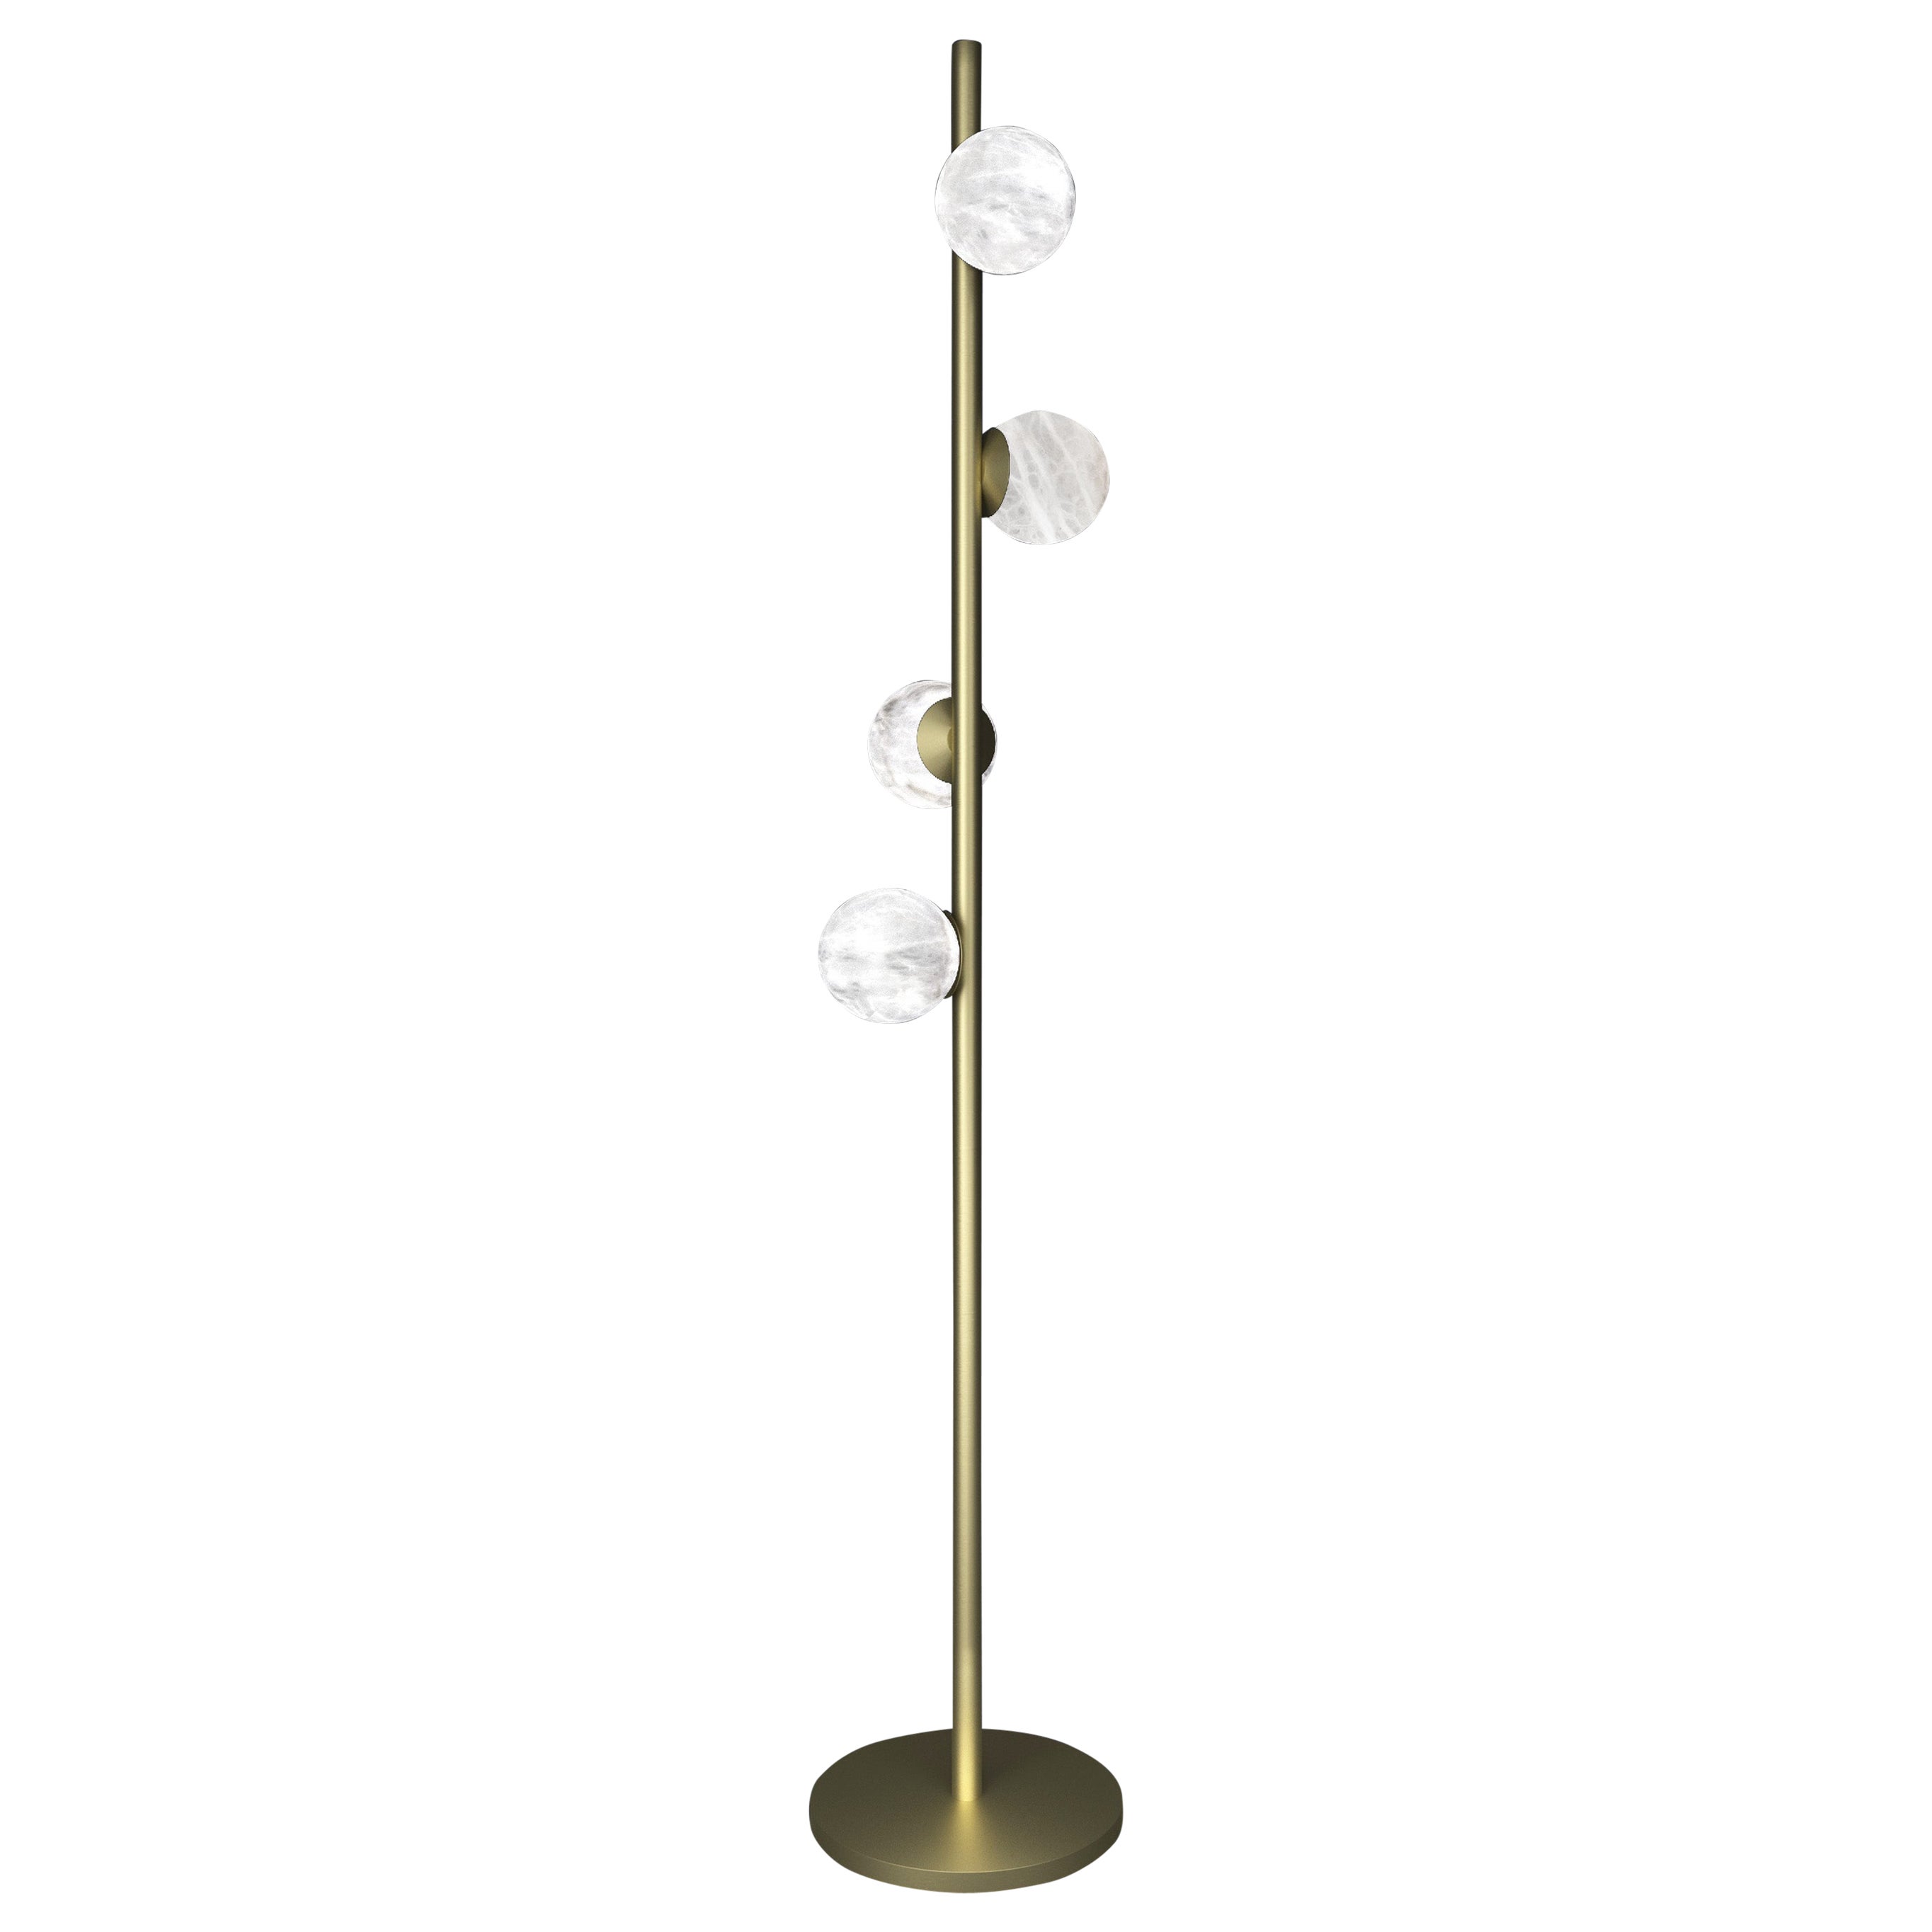 Ofione Brushed Brass Floor Lamp by Alabastro Italiano